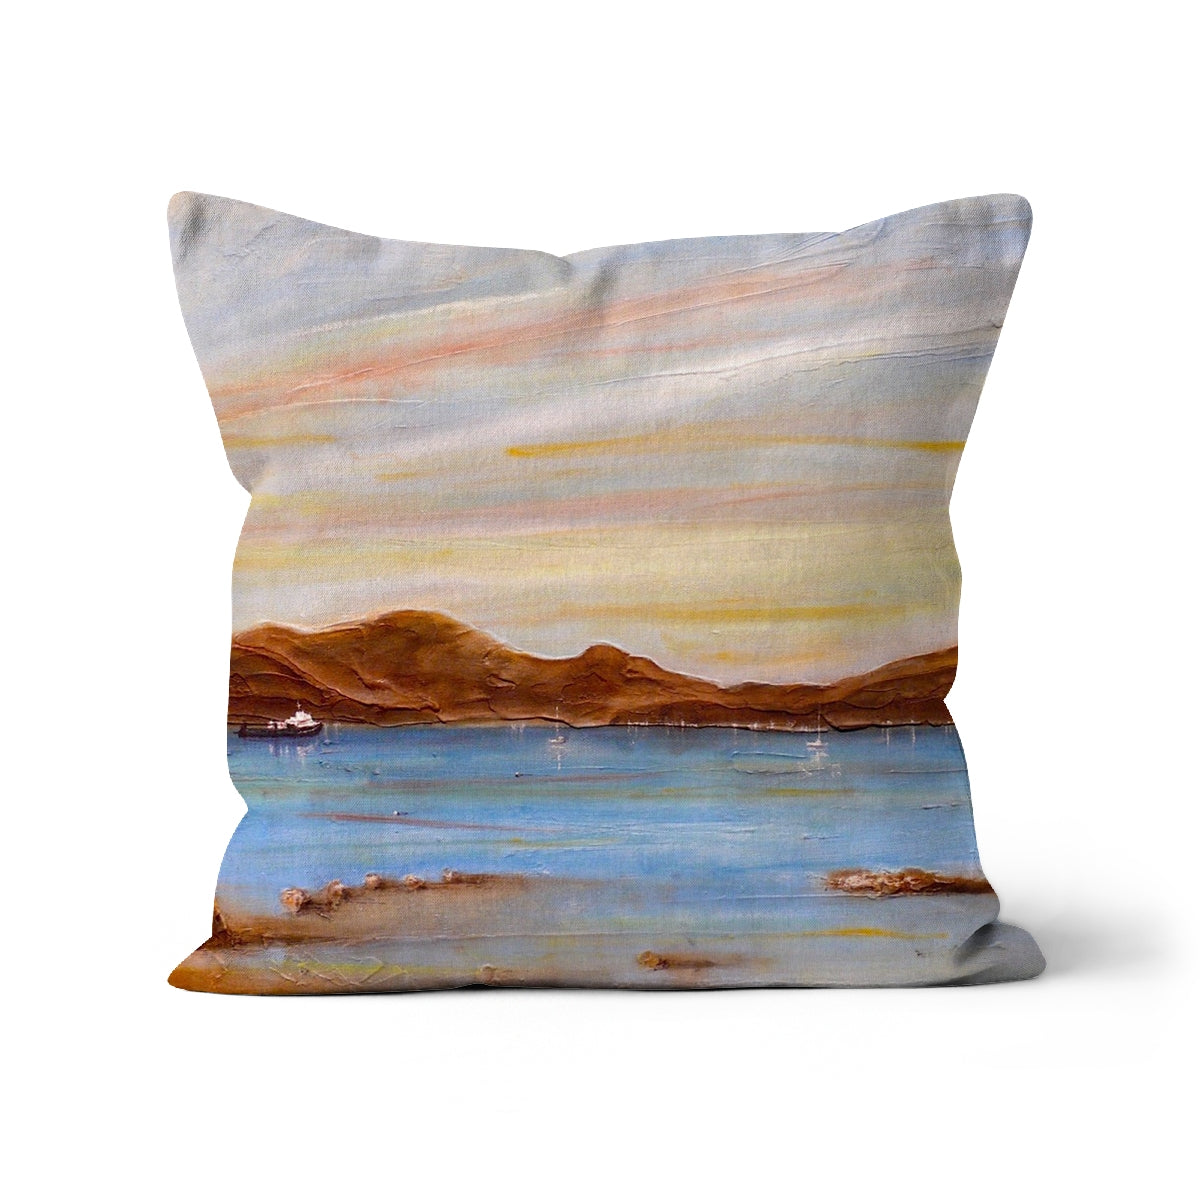 The Last Ferry To Dunoon Art Gifts Cushion-Cushions-River Clyde Art Gallery-Linen-18"x18"-Paintings, Prints, Homeware, Art Gifts From Scotland By Scottish Artist Kevin Hunter